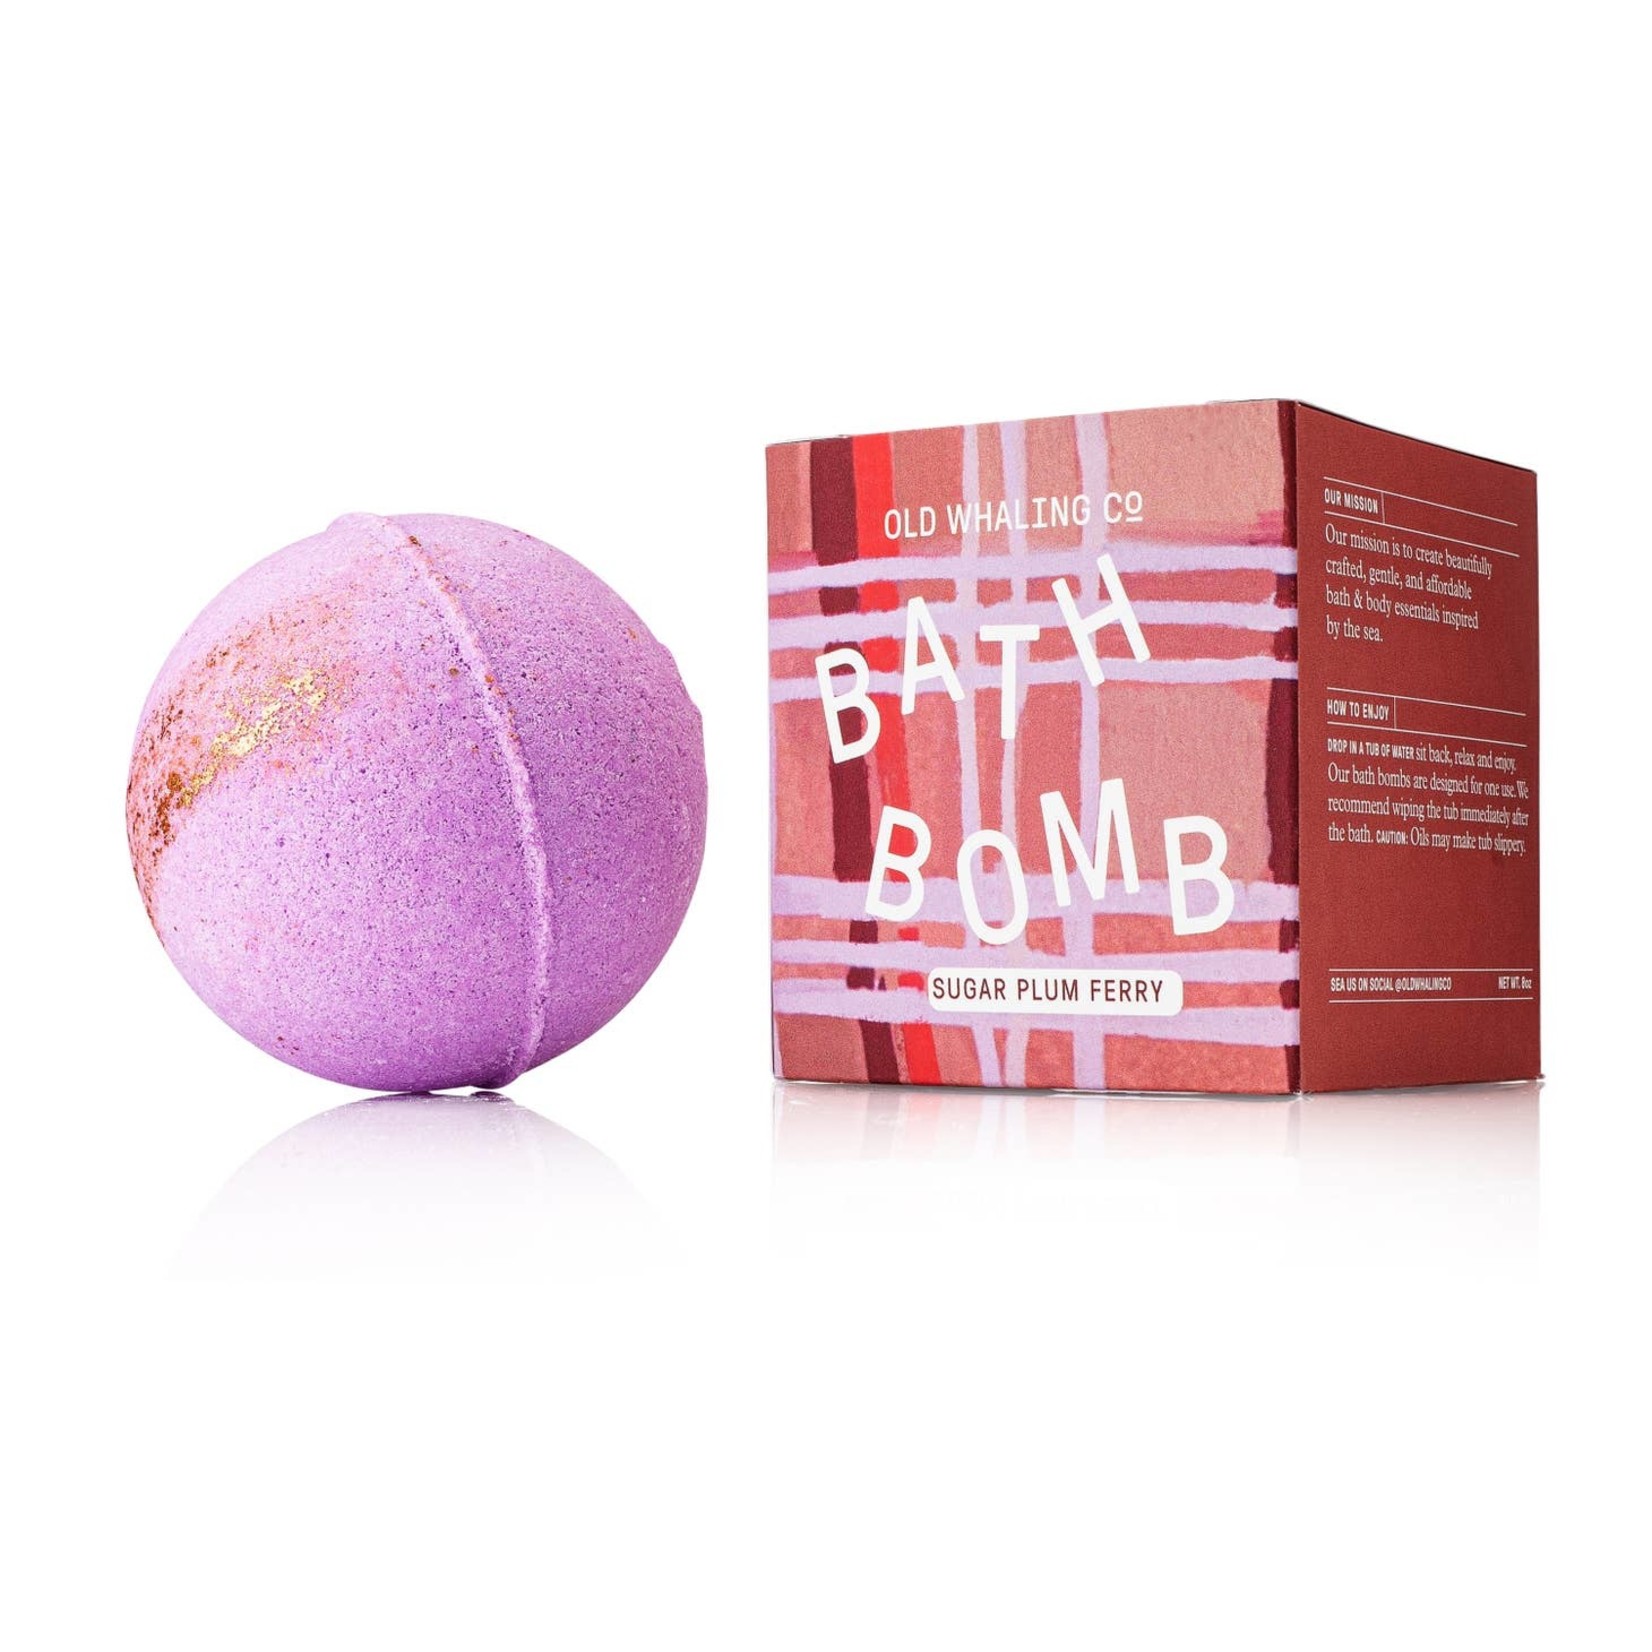 Old Whaling Company Old Whaling Company Bath Bomb Sugar Plum Ferry